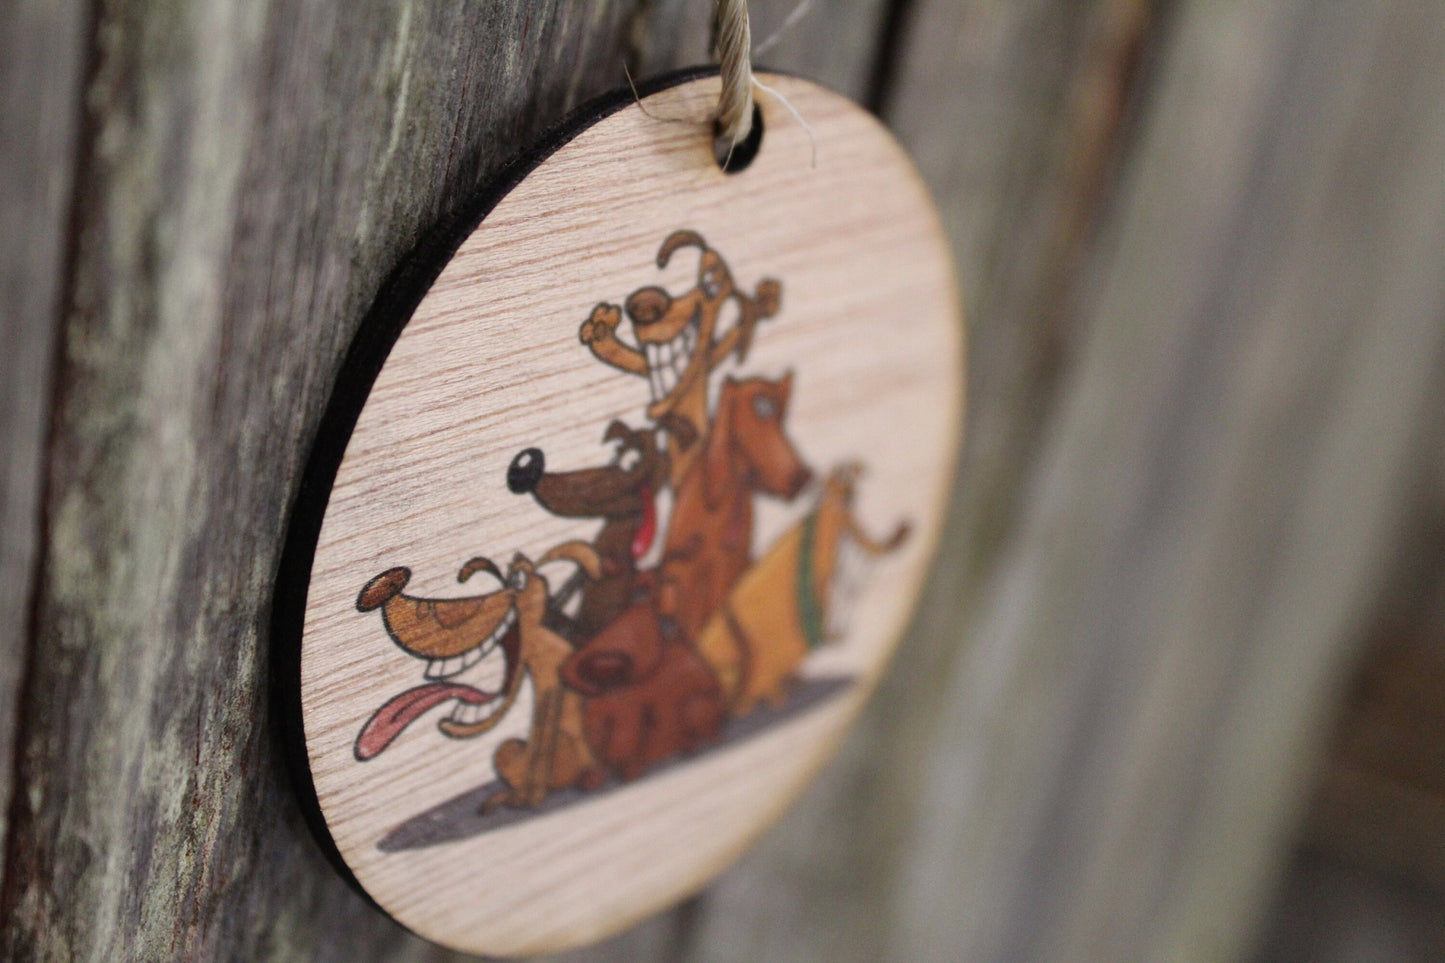 Goofy Dog Group Ornament Wood Party Tongue Teeth Vet Gift Veterinarian Present Dog Lover Wall Hanging Tree Rustic Farmhouse Shabby Chic Wood